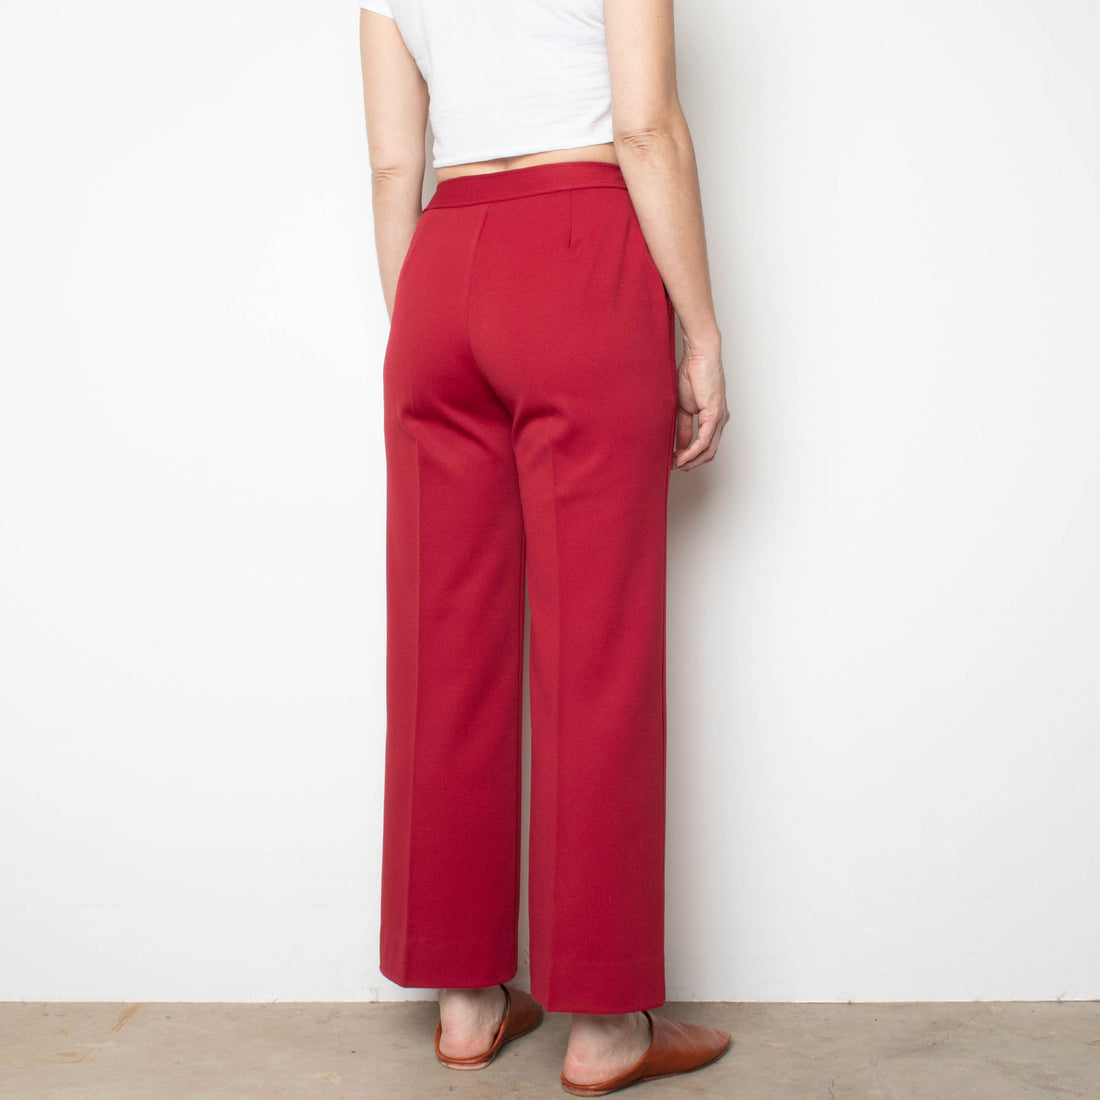 70s Red Flare Pant